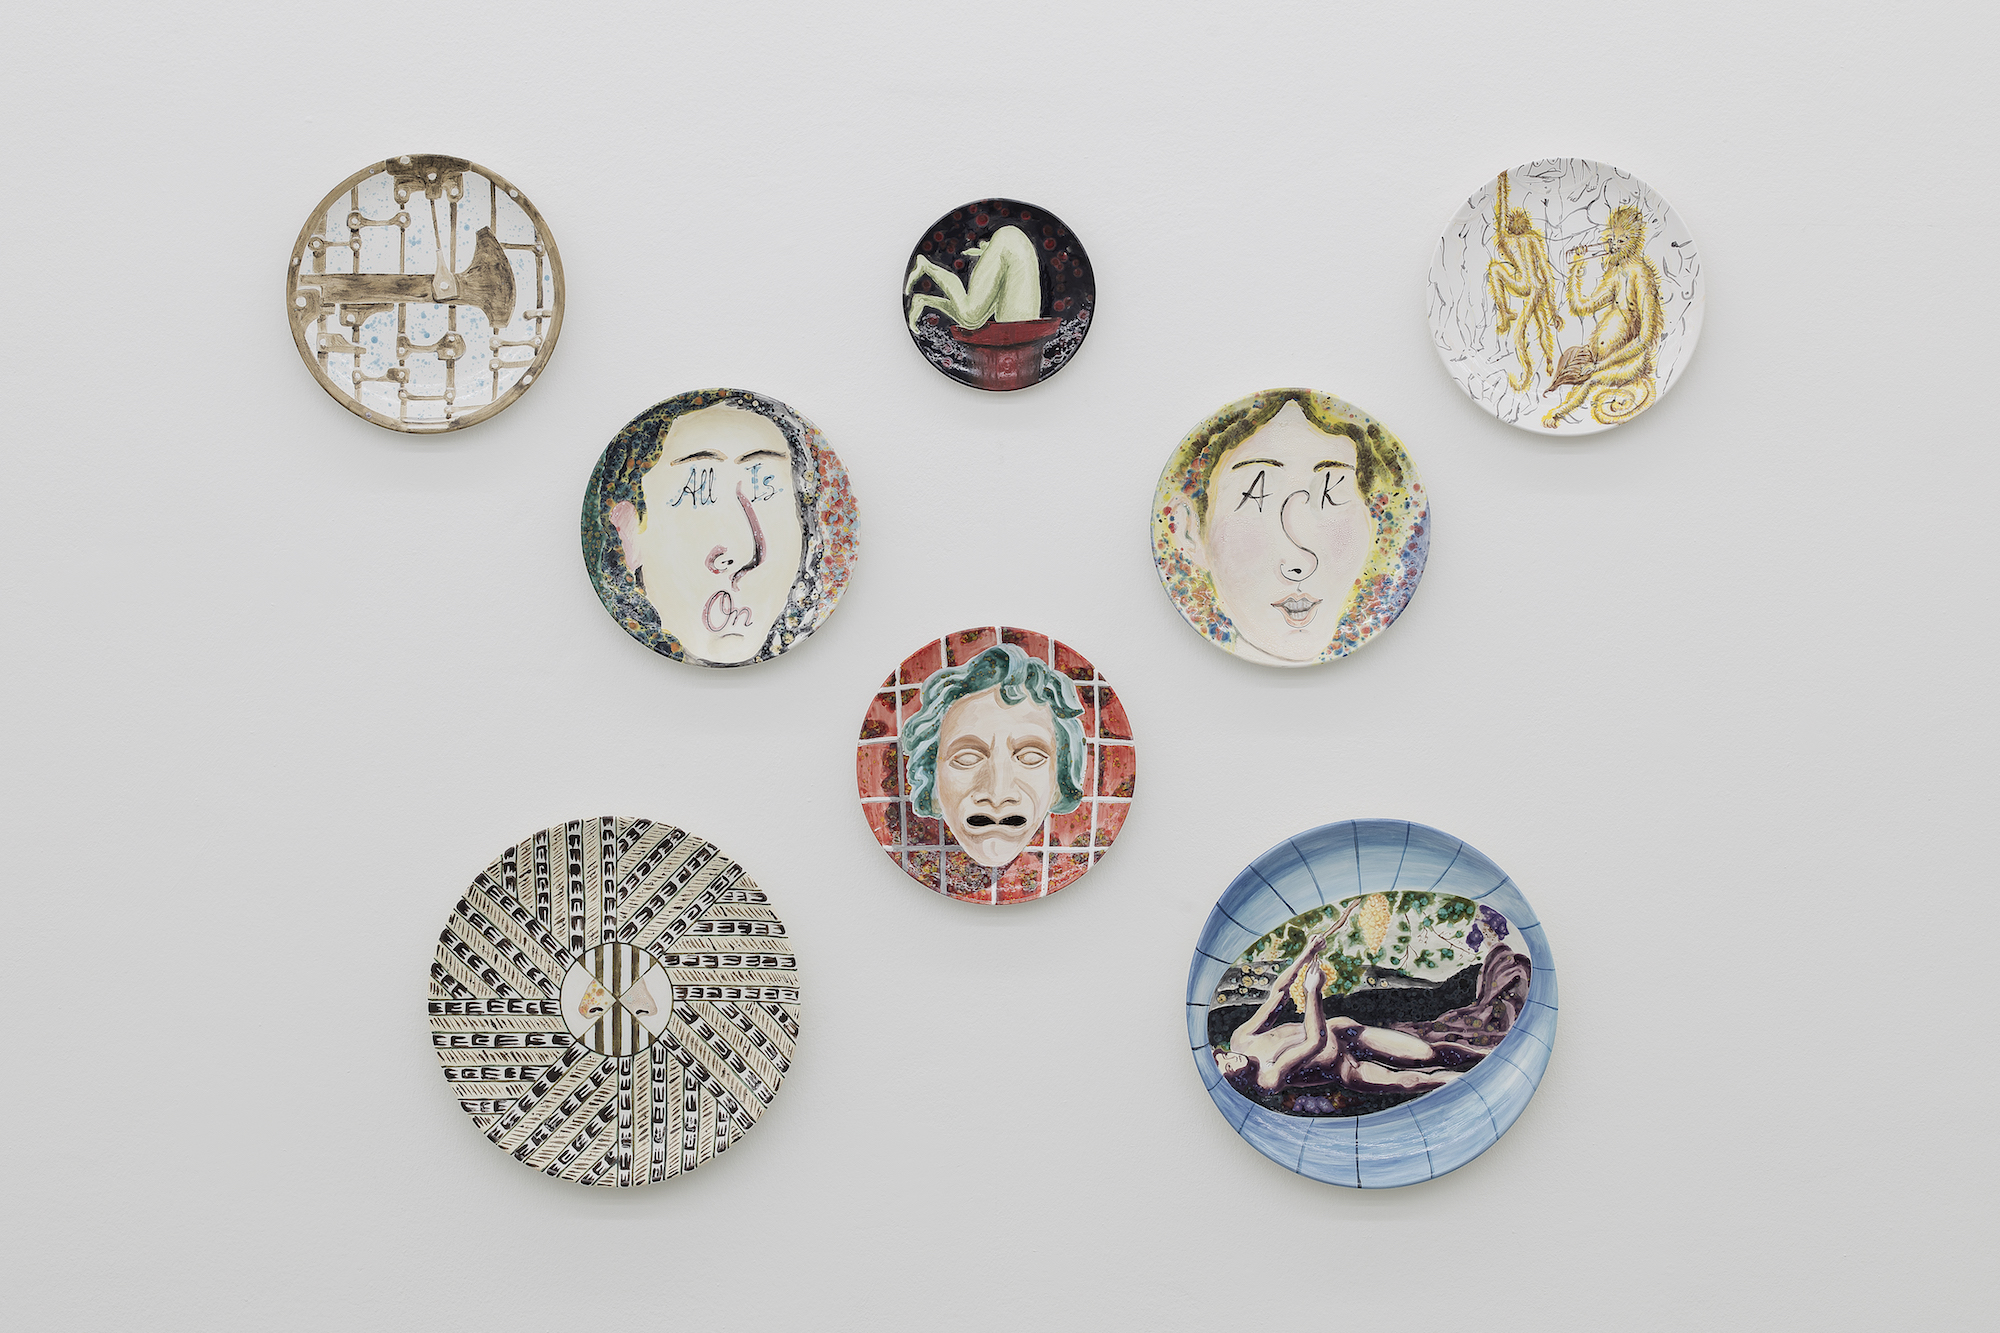 Installation view of Allison Katz's plates in Period, a solo show at Gió Marconi, 2018 